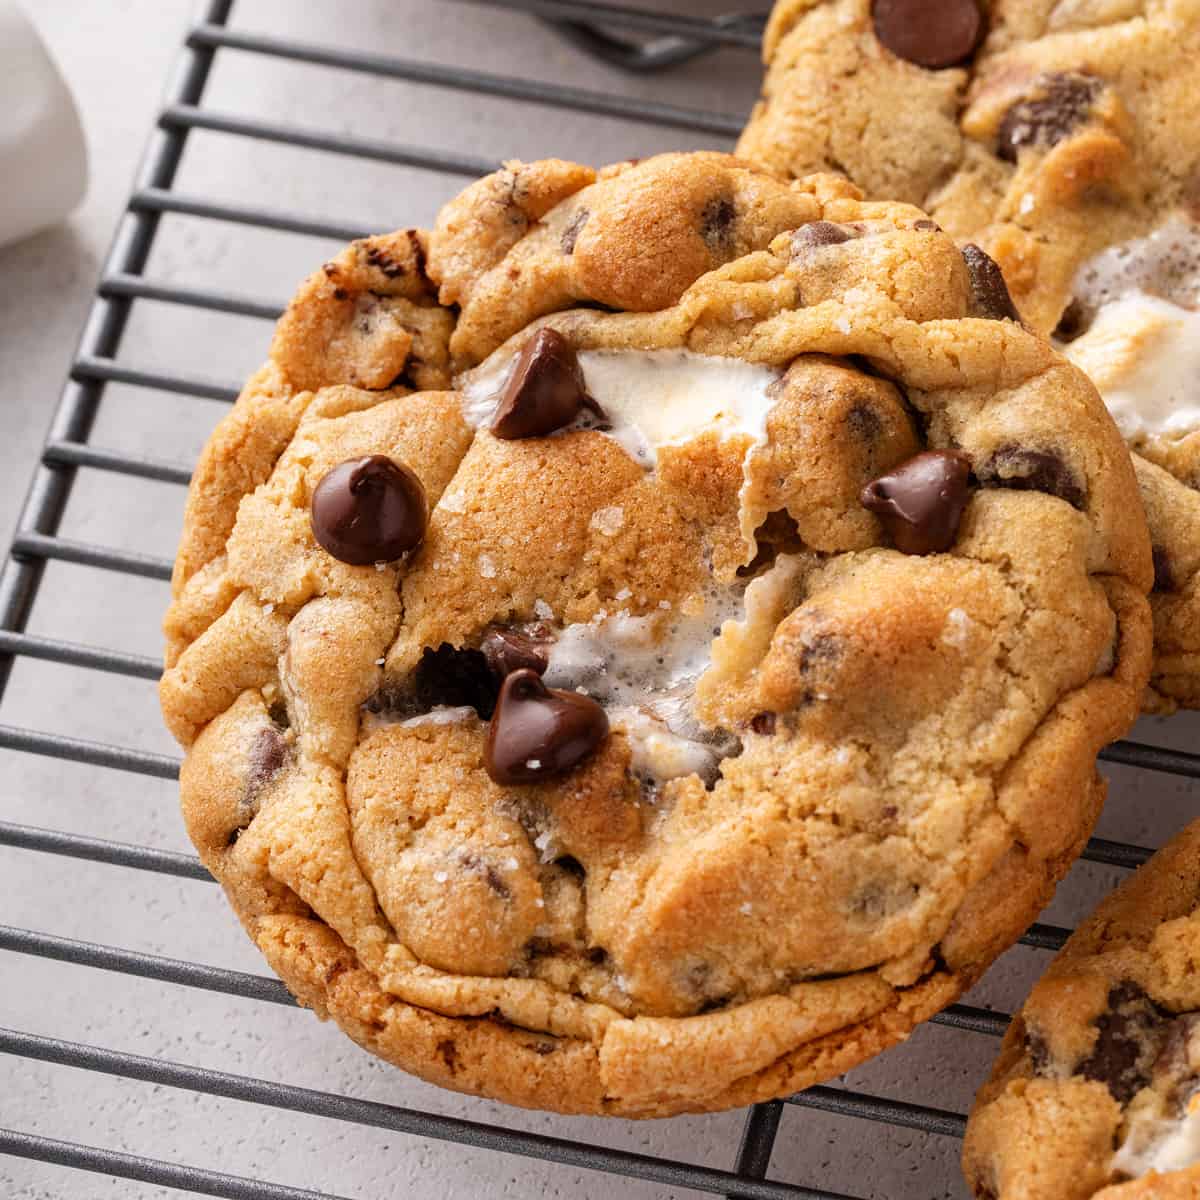 The Best Cookie Scooper and How to use it - Cookies for Days